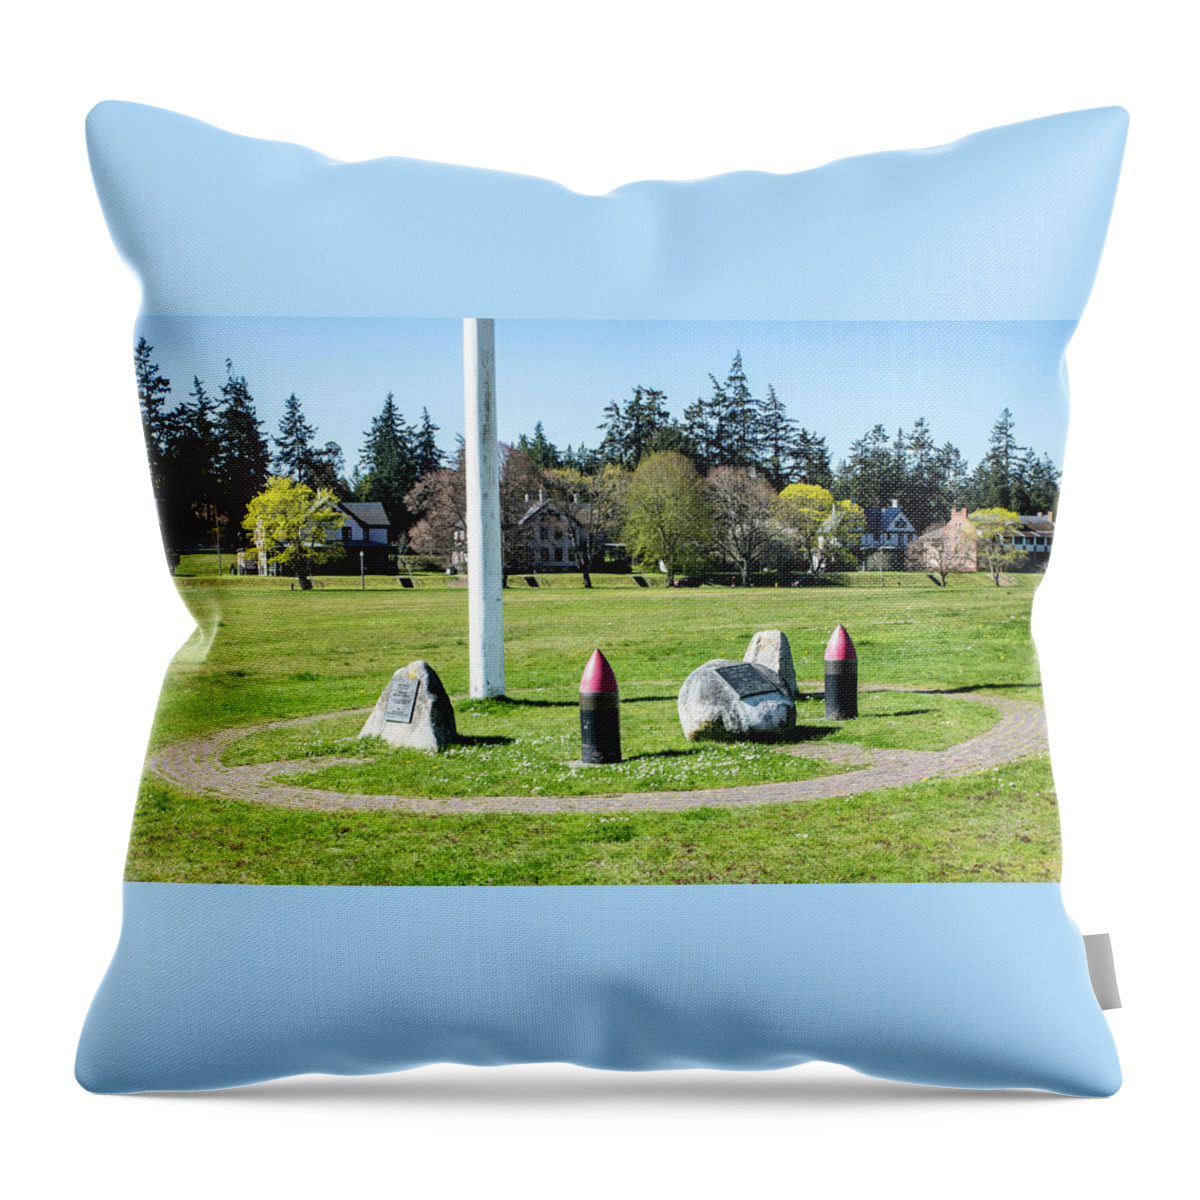 Fort Worden Flagpole Throw Pillow featuring the photograph Fort Worden Flagpole by Tom Cochran